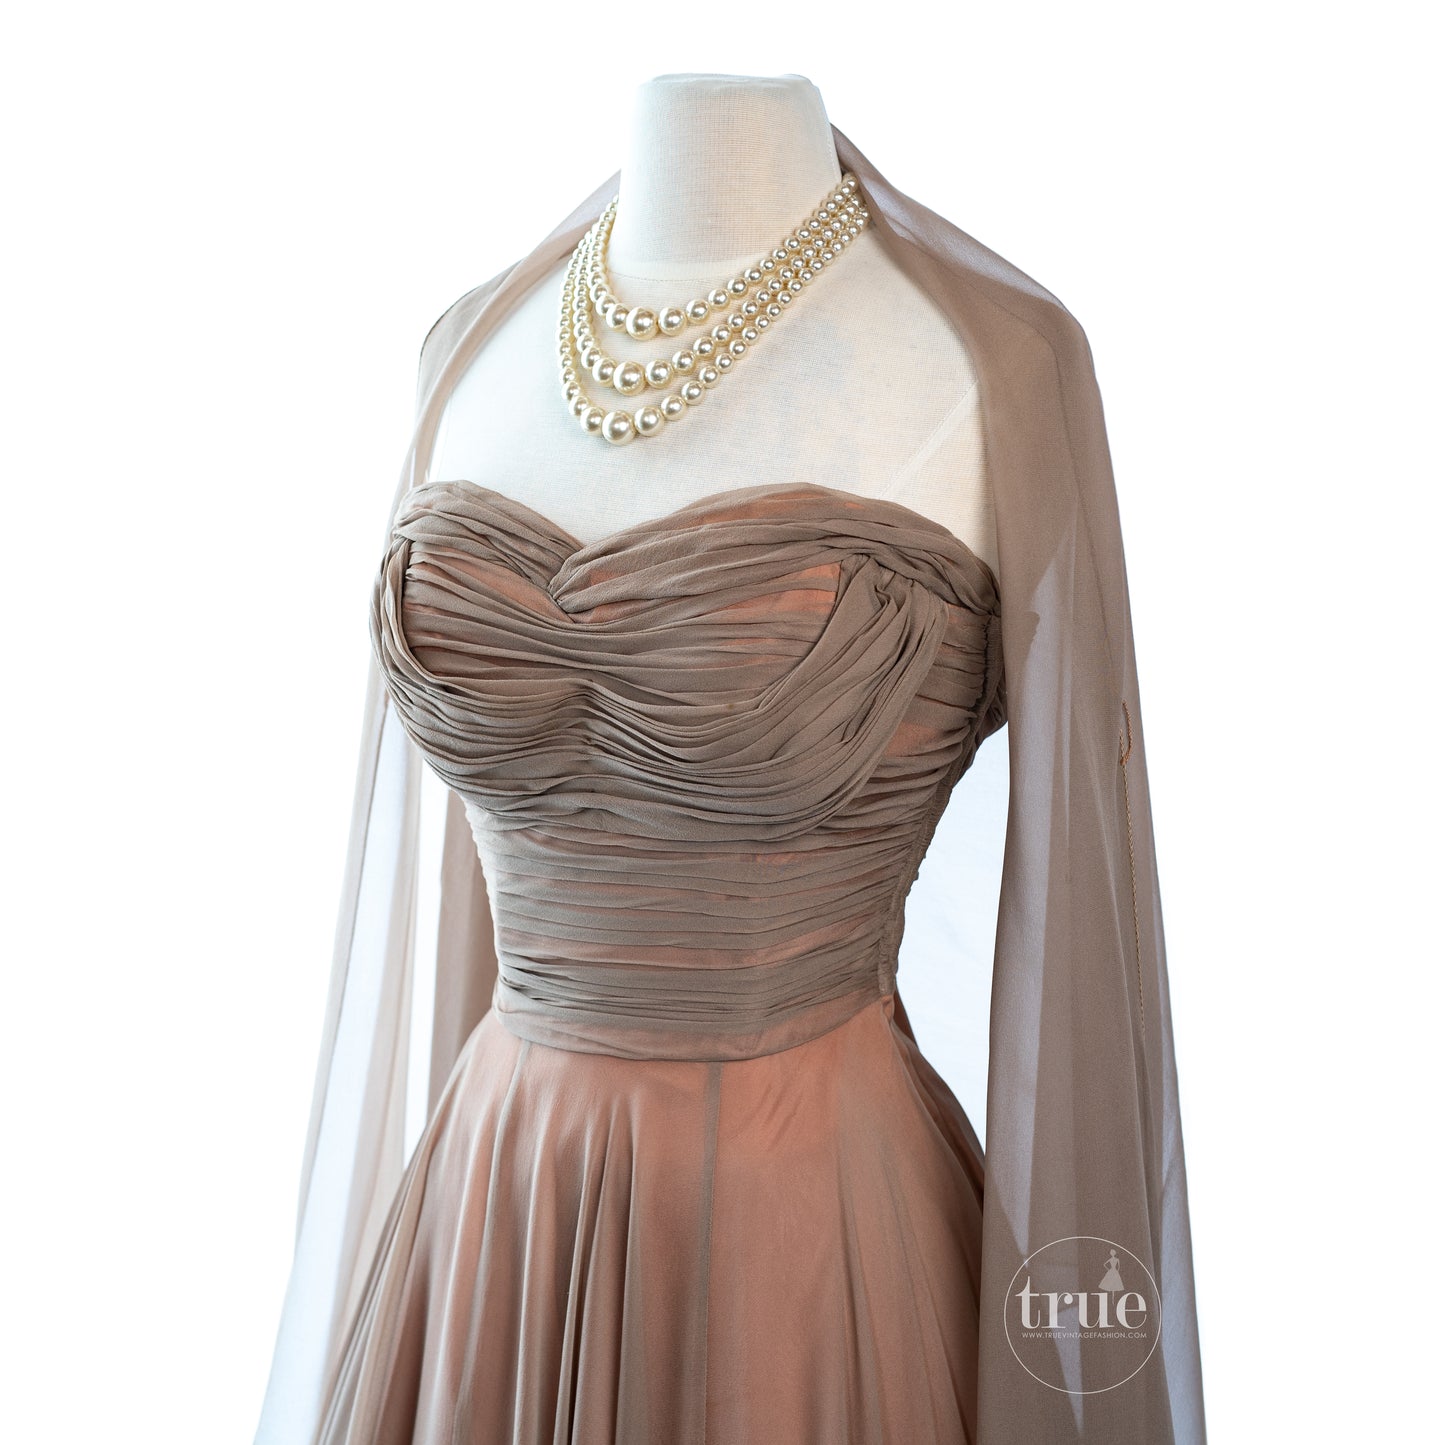 vintage 1950's dress ...dreamy ESTELLE ALLARDALE of beverly hills shirred bodice BOMBSHELL shelf-bust silk chiffon cocktail party dress with shawl